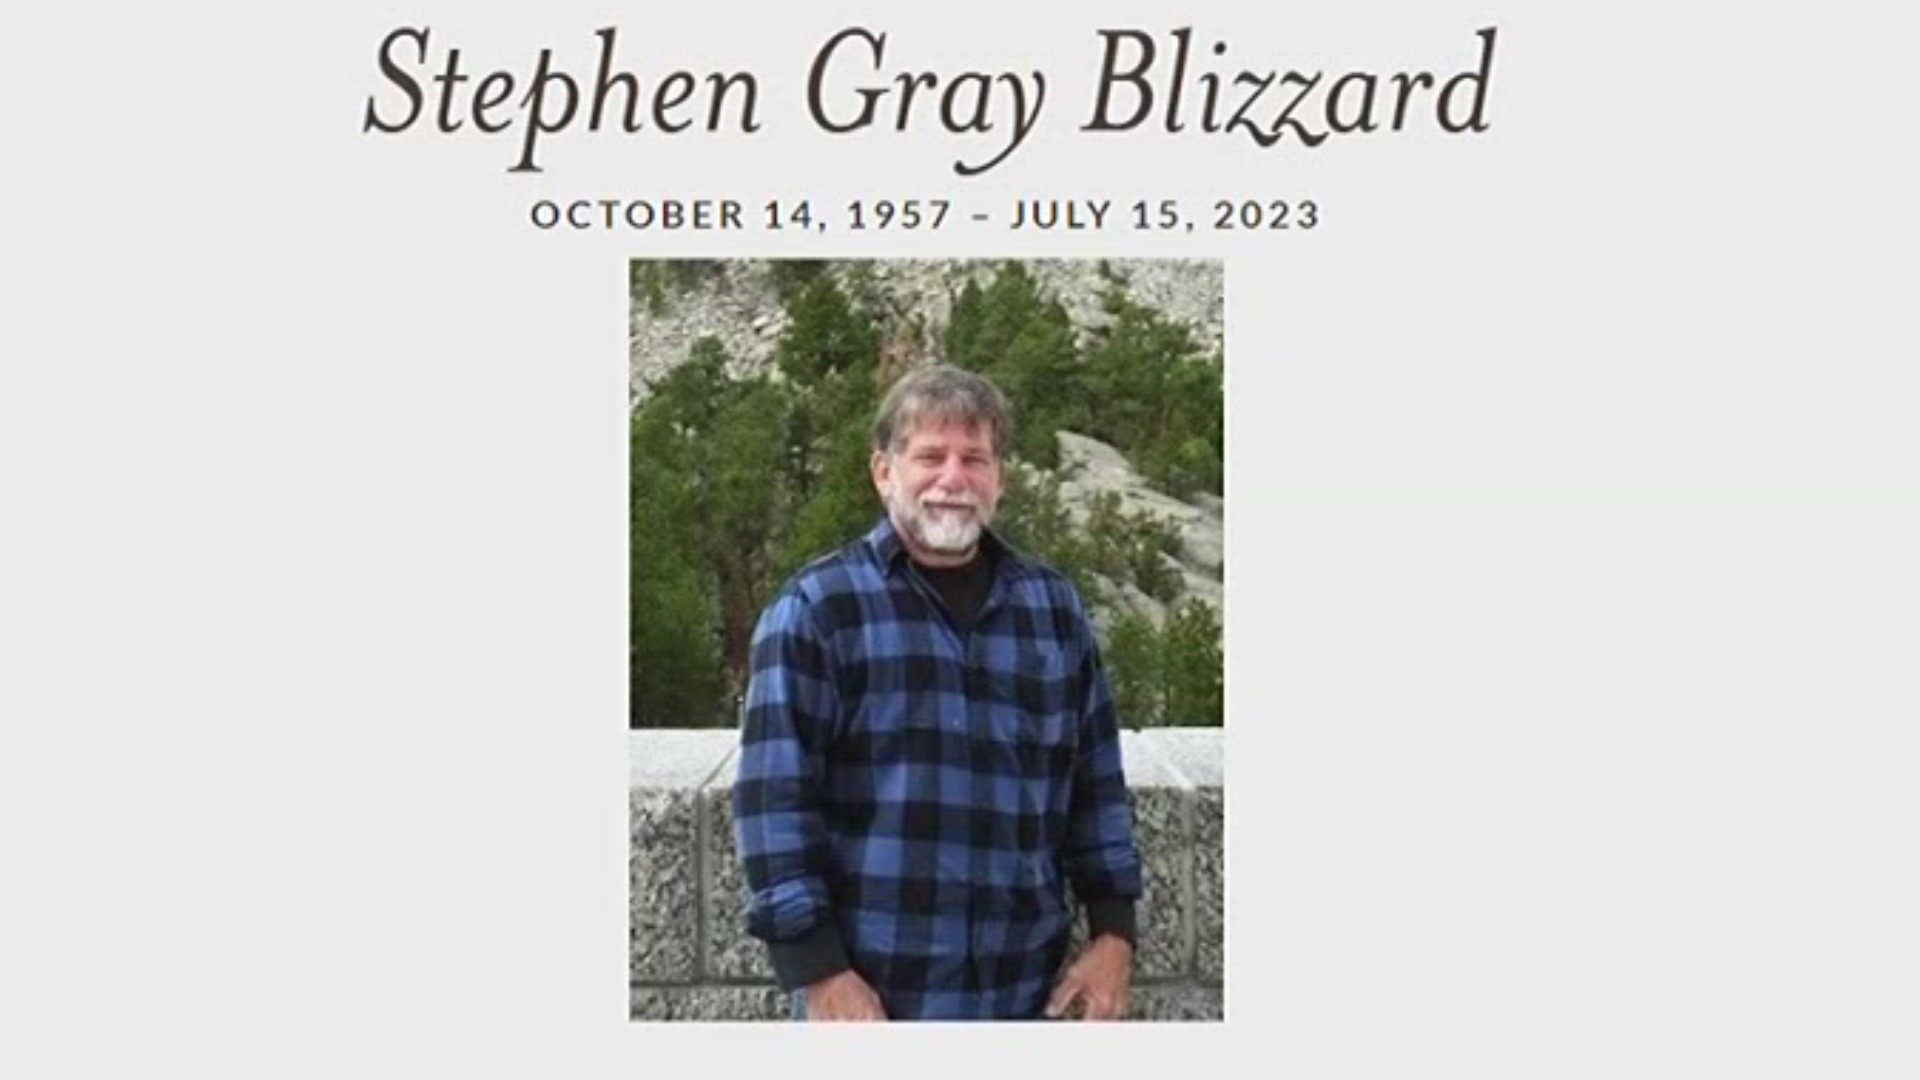 The services will remember the life of Steve Blizzard.